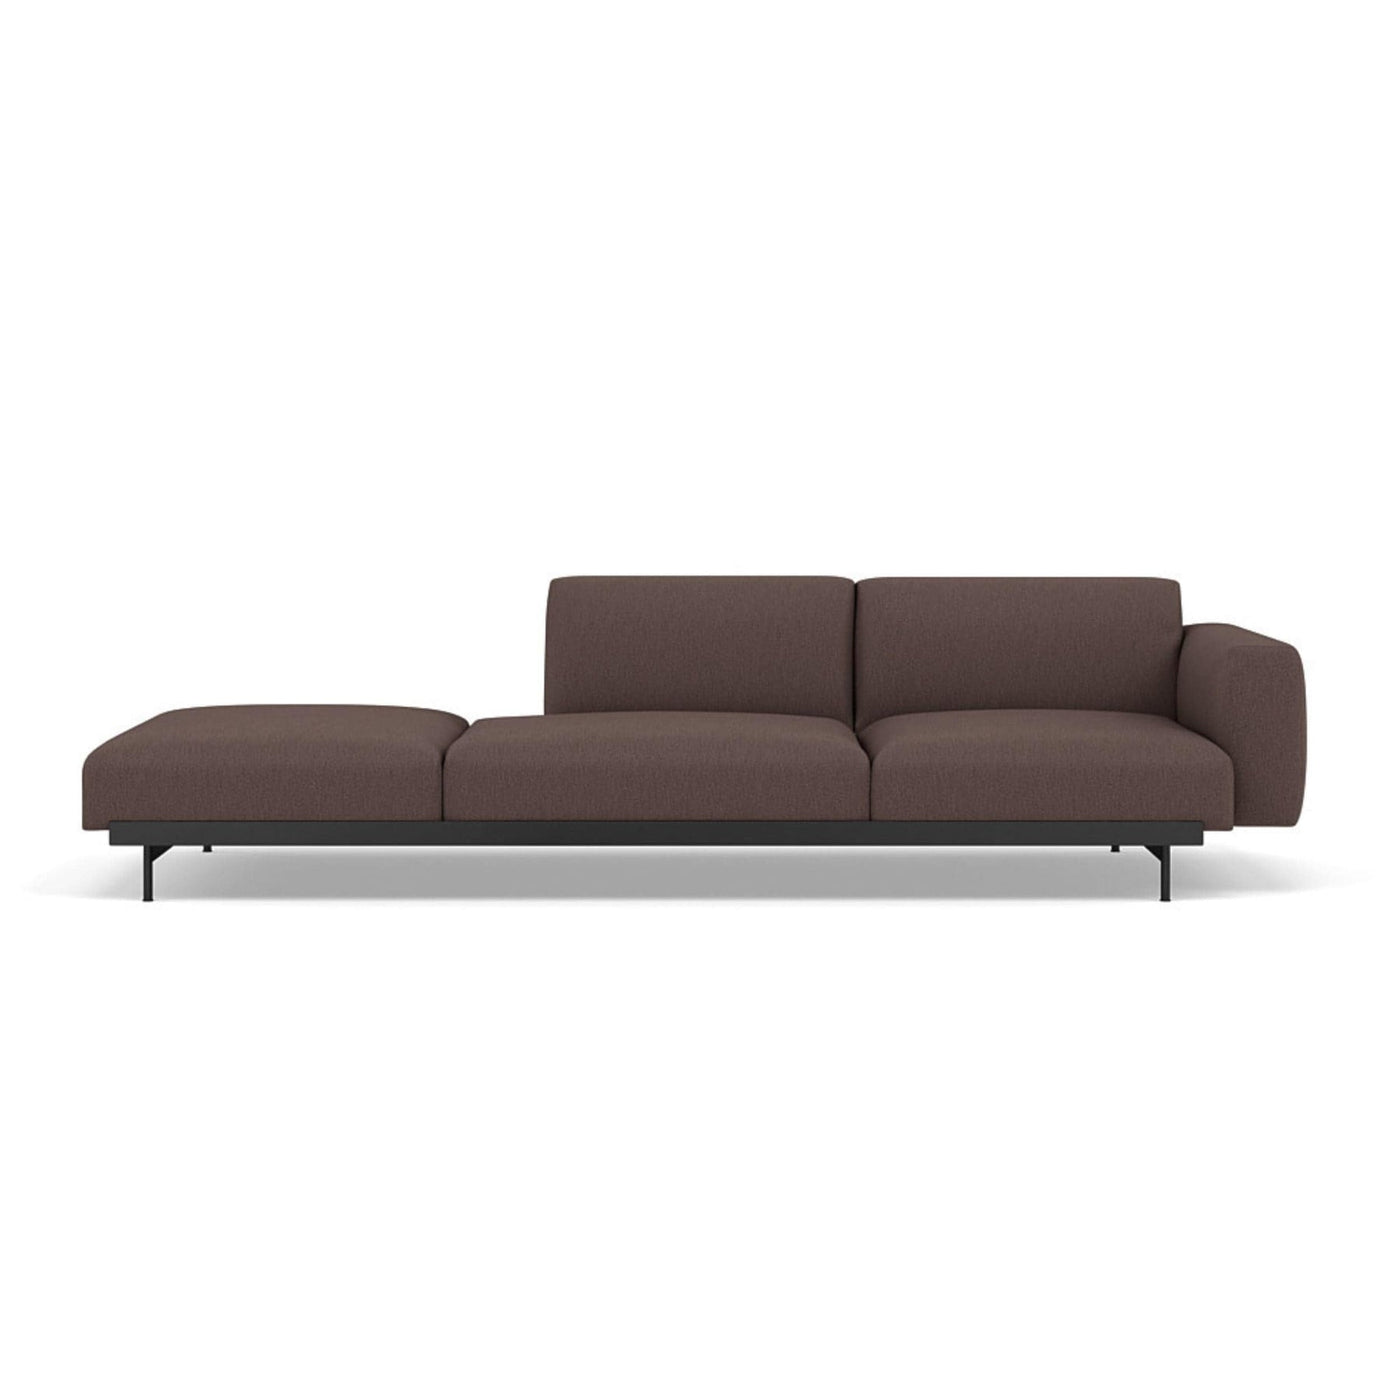 Muuto In Situ Sofa 3 seater configuration 4 in clay 6 fabric. Made to order at someday designs. #colour_clay-6-red-brown